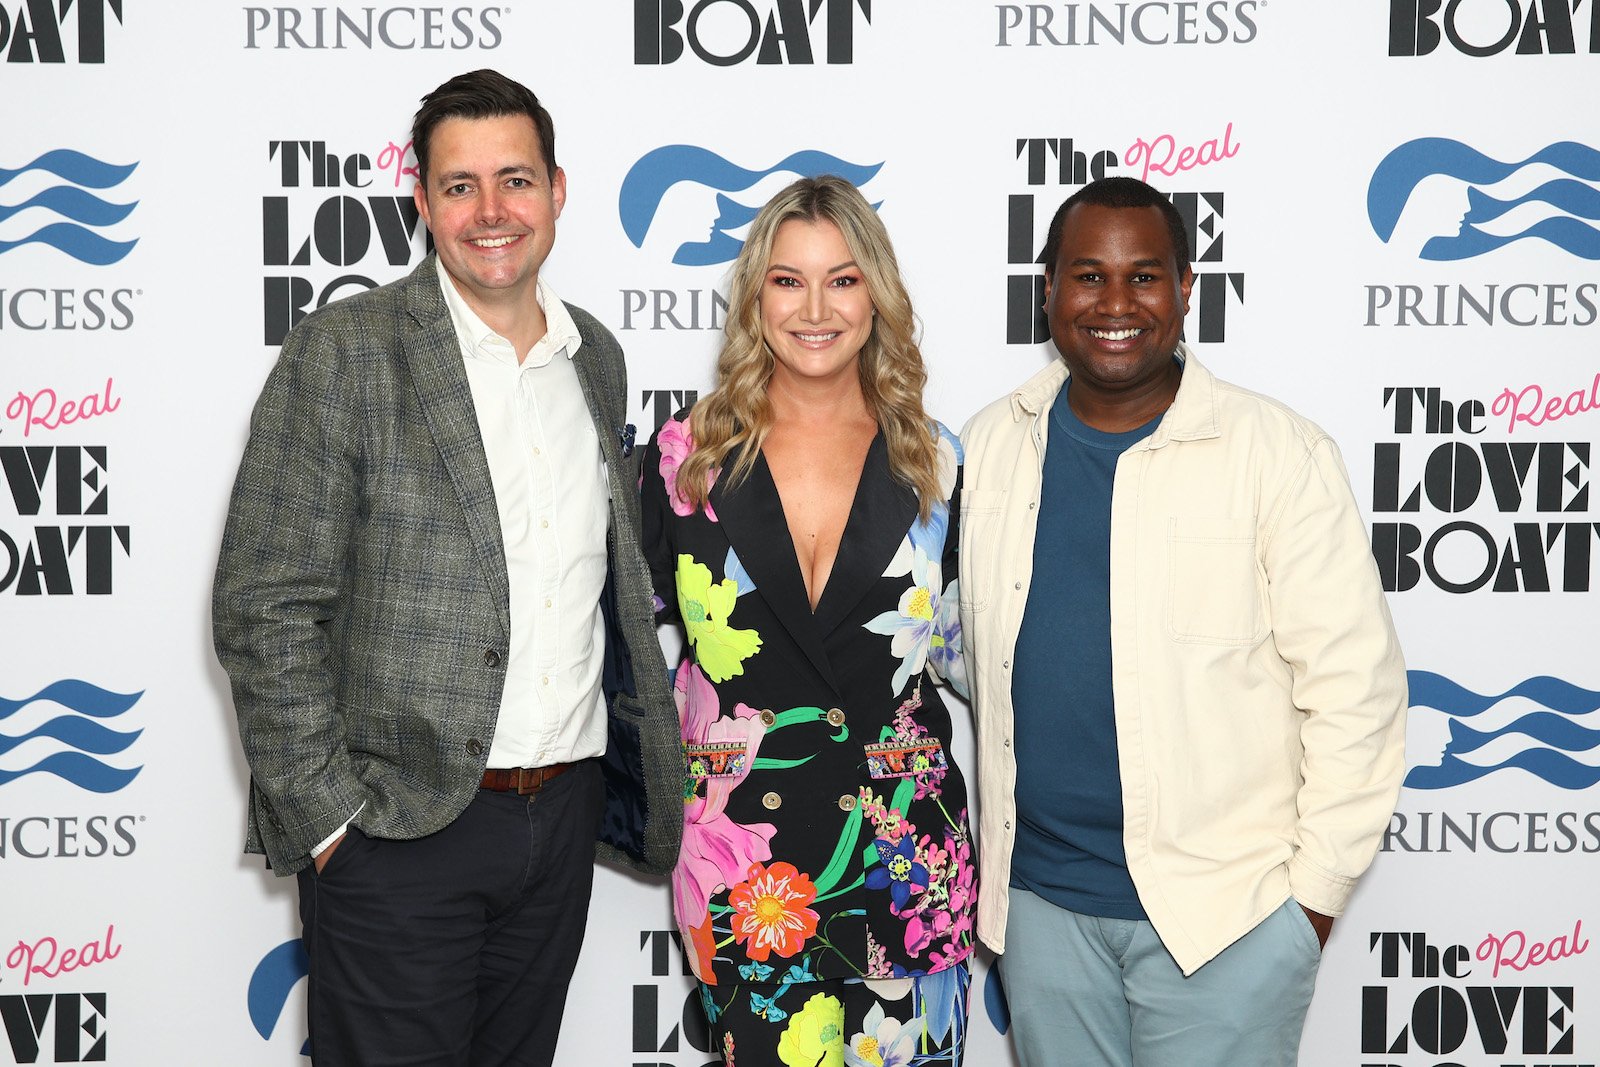 Hannah Ferrier is not worried about BravoCon, in fact she recently hit the red carpet for her new show 'The Real Love Boat.'